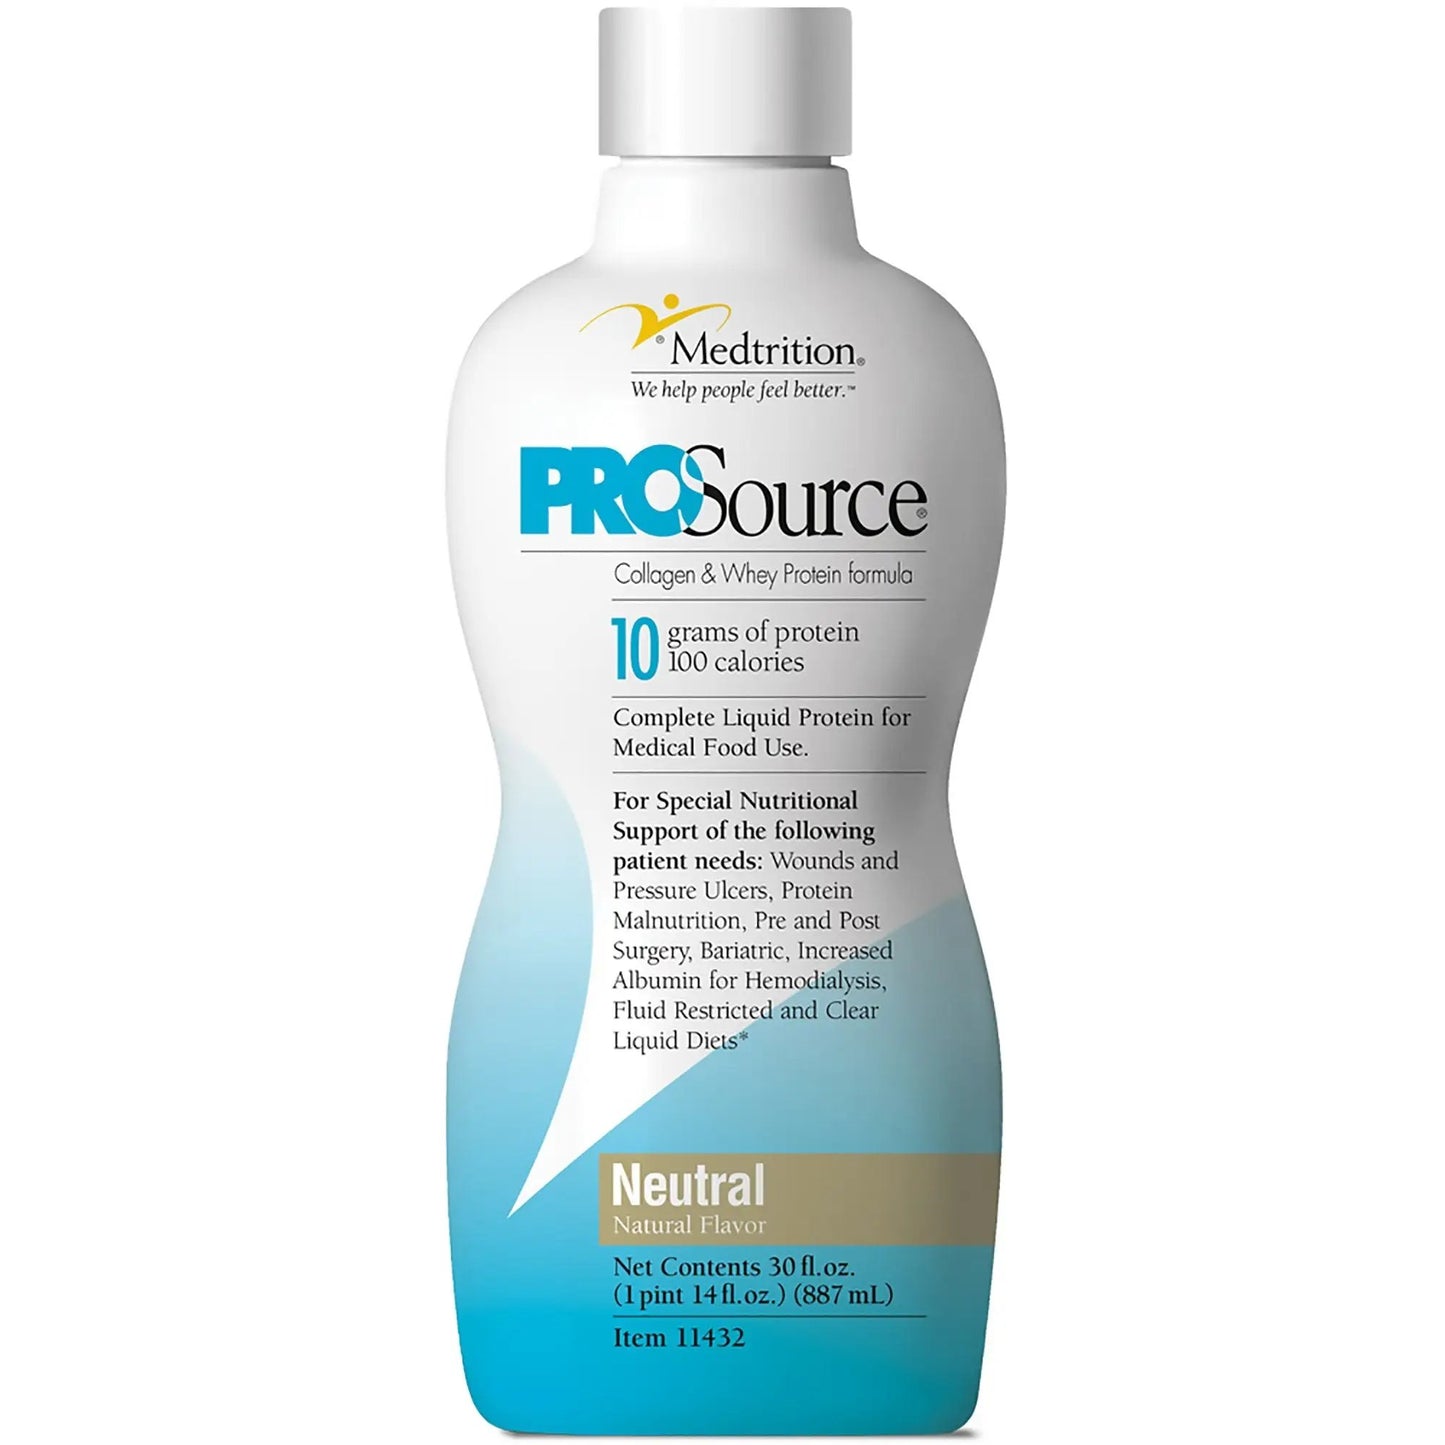 ProSource Unflavored Ready to Use Protein Supplement, 30 oz. Bottle